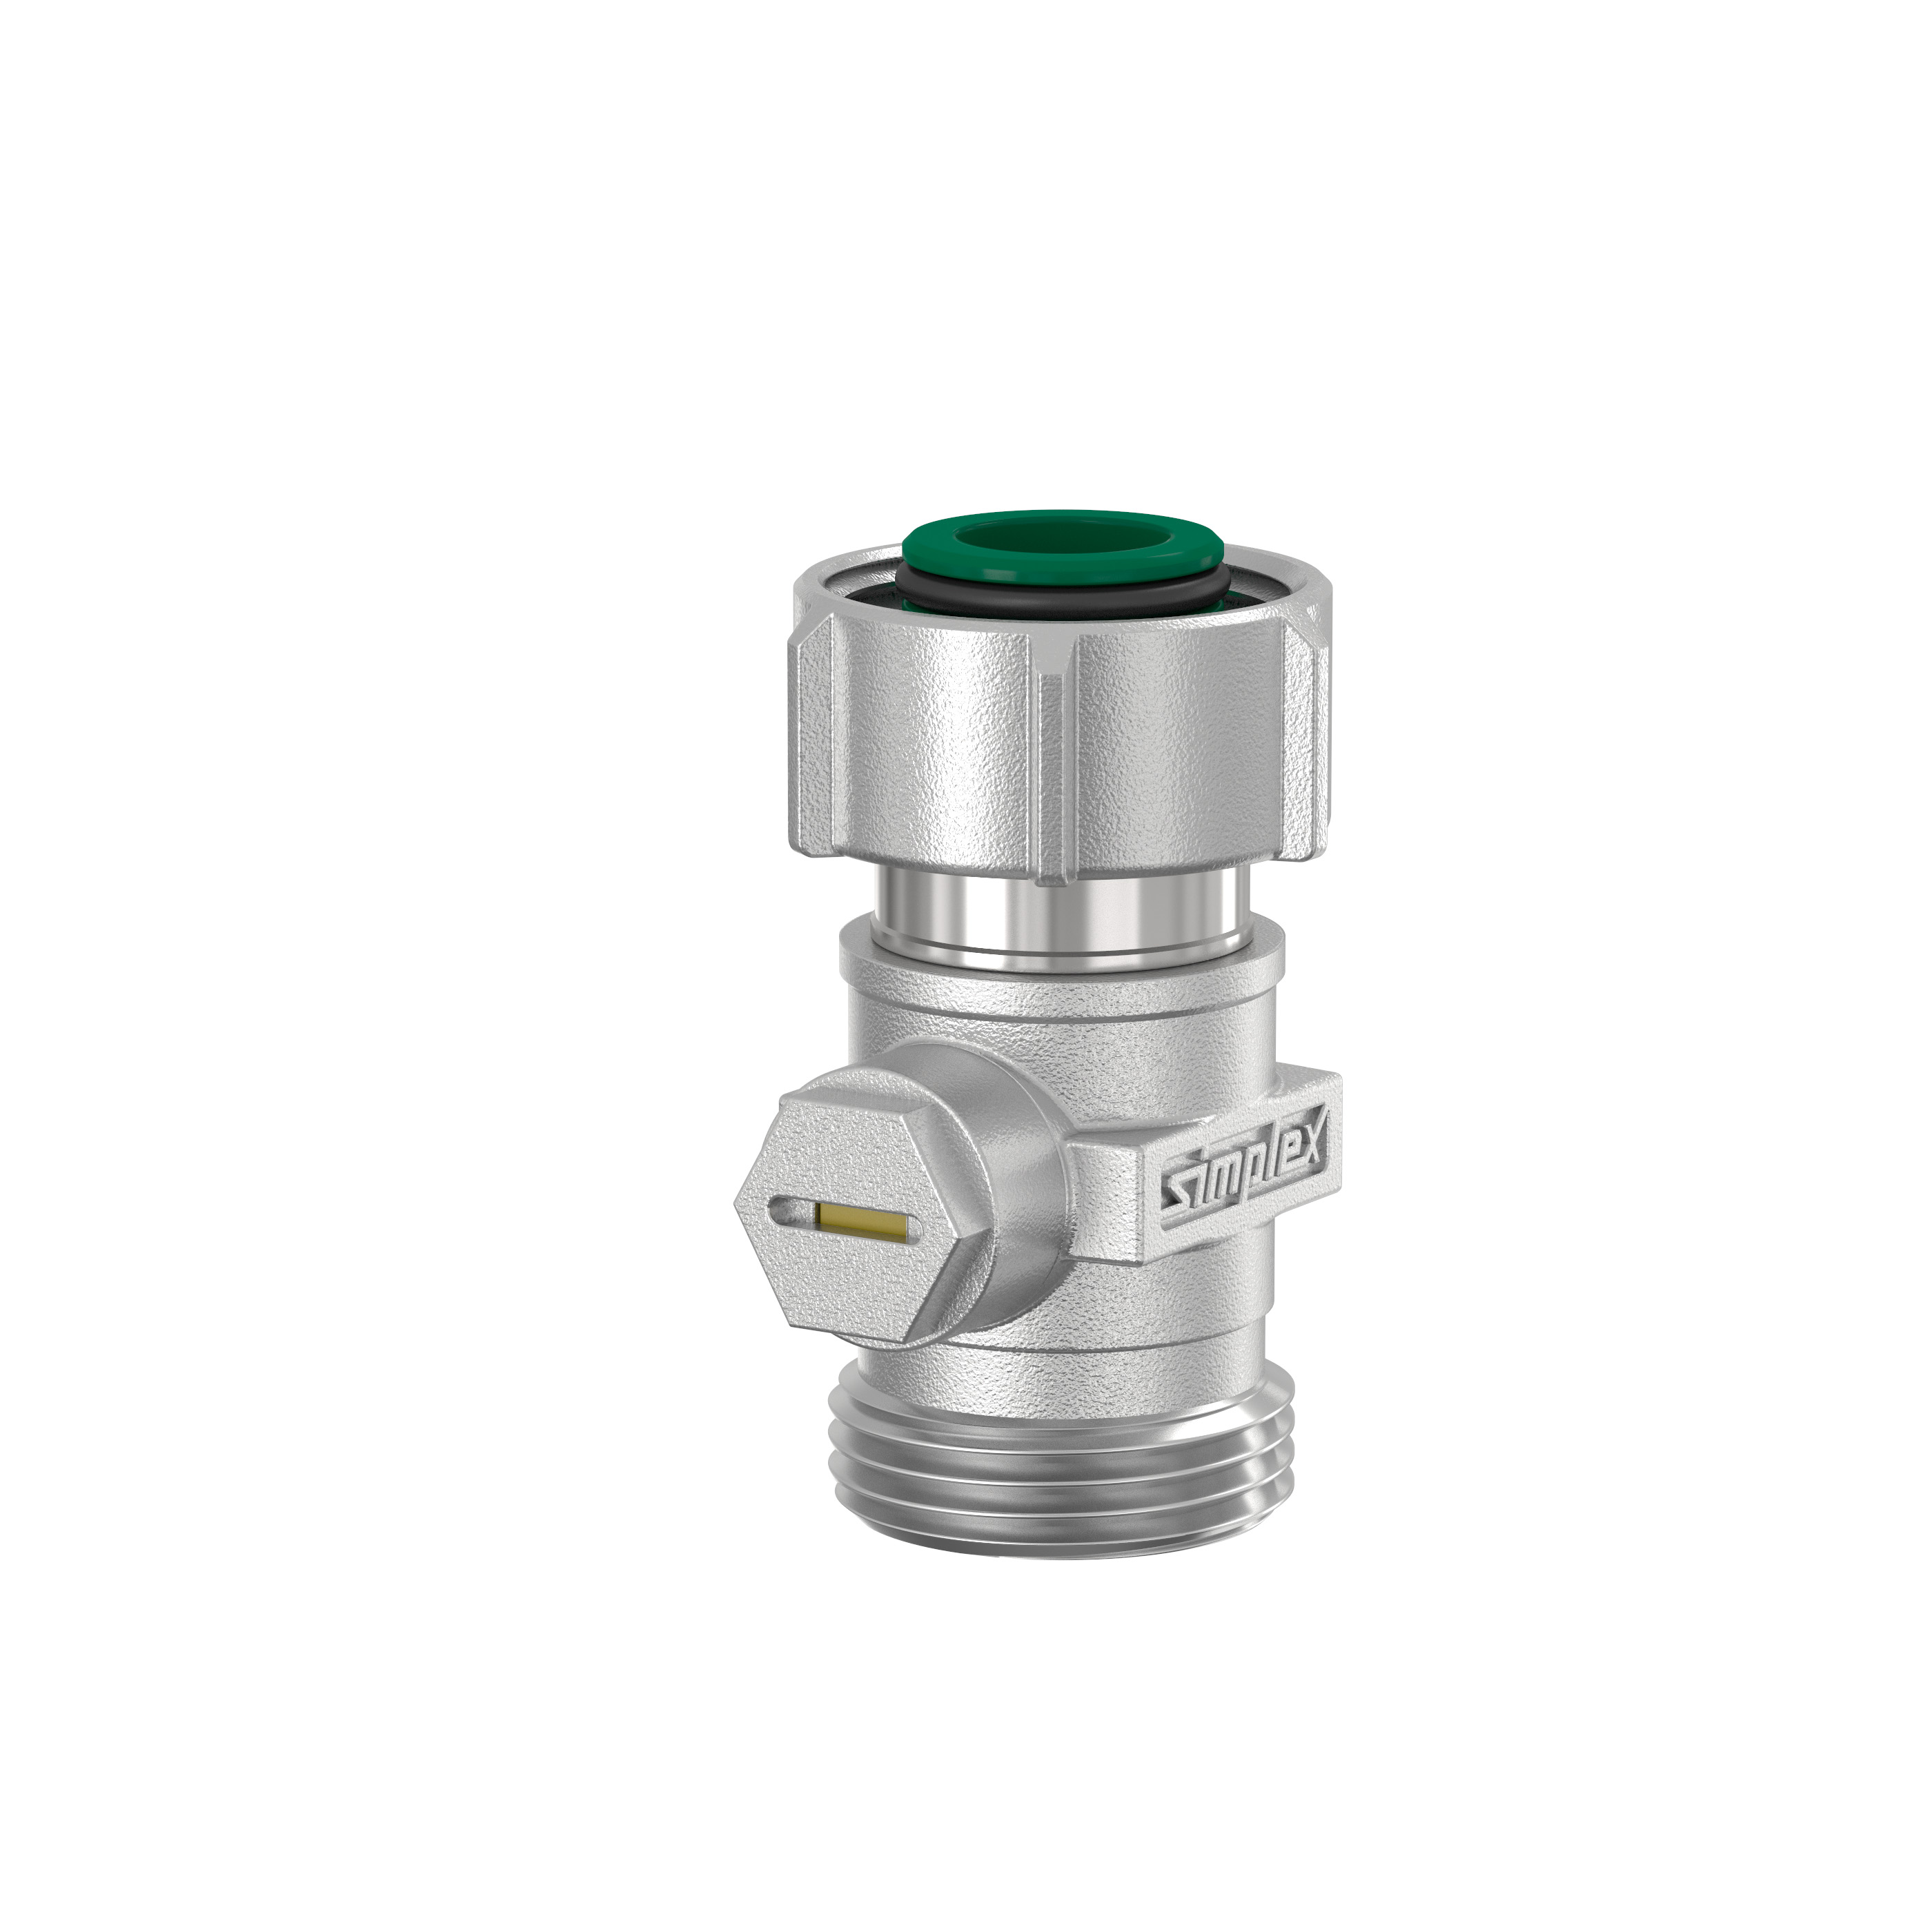 EXCLUSIV Single Valve with Cone Inserts and Male Thread